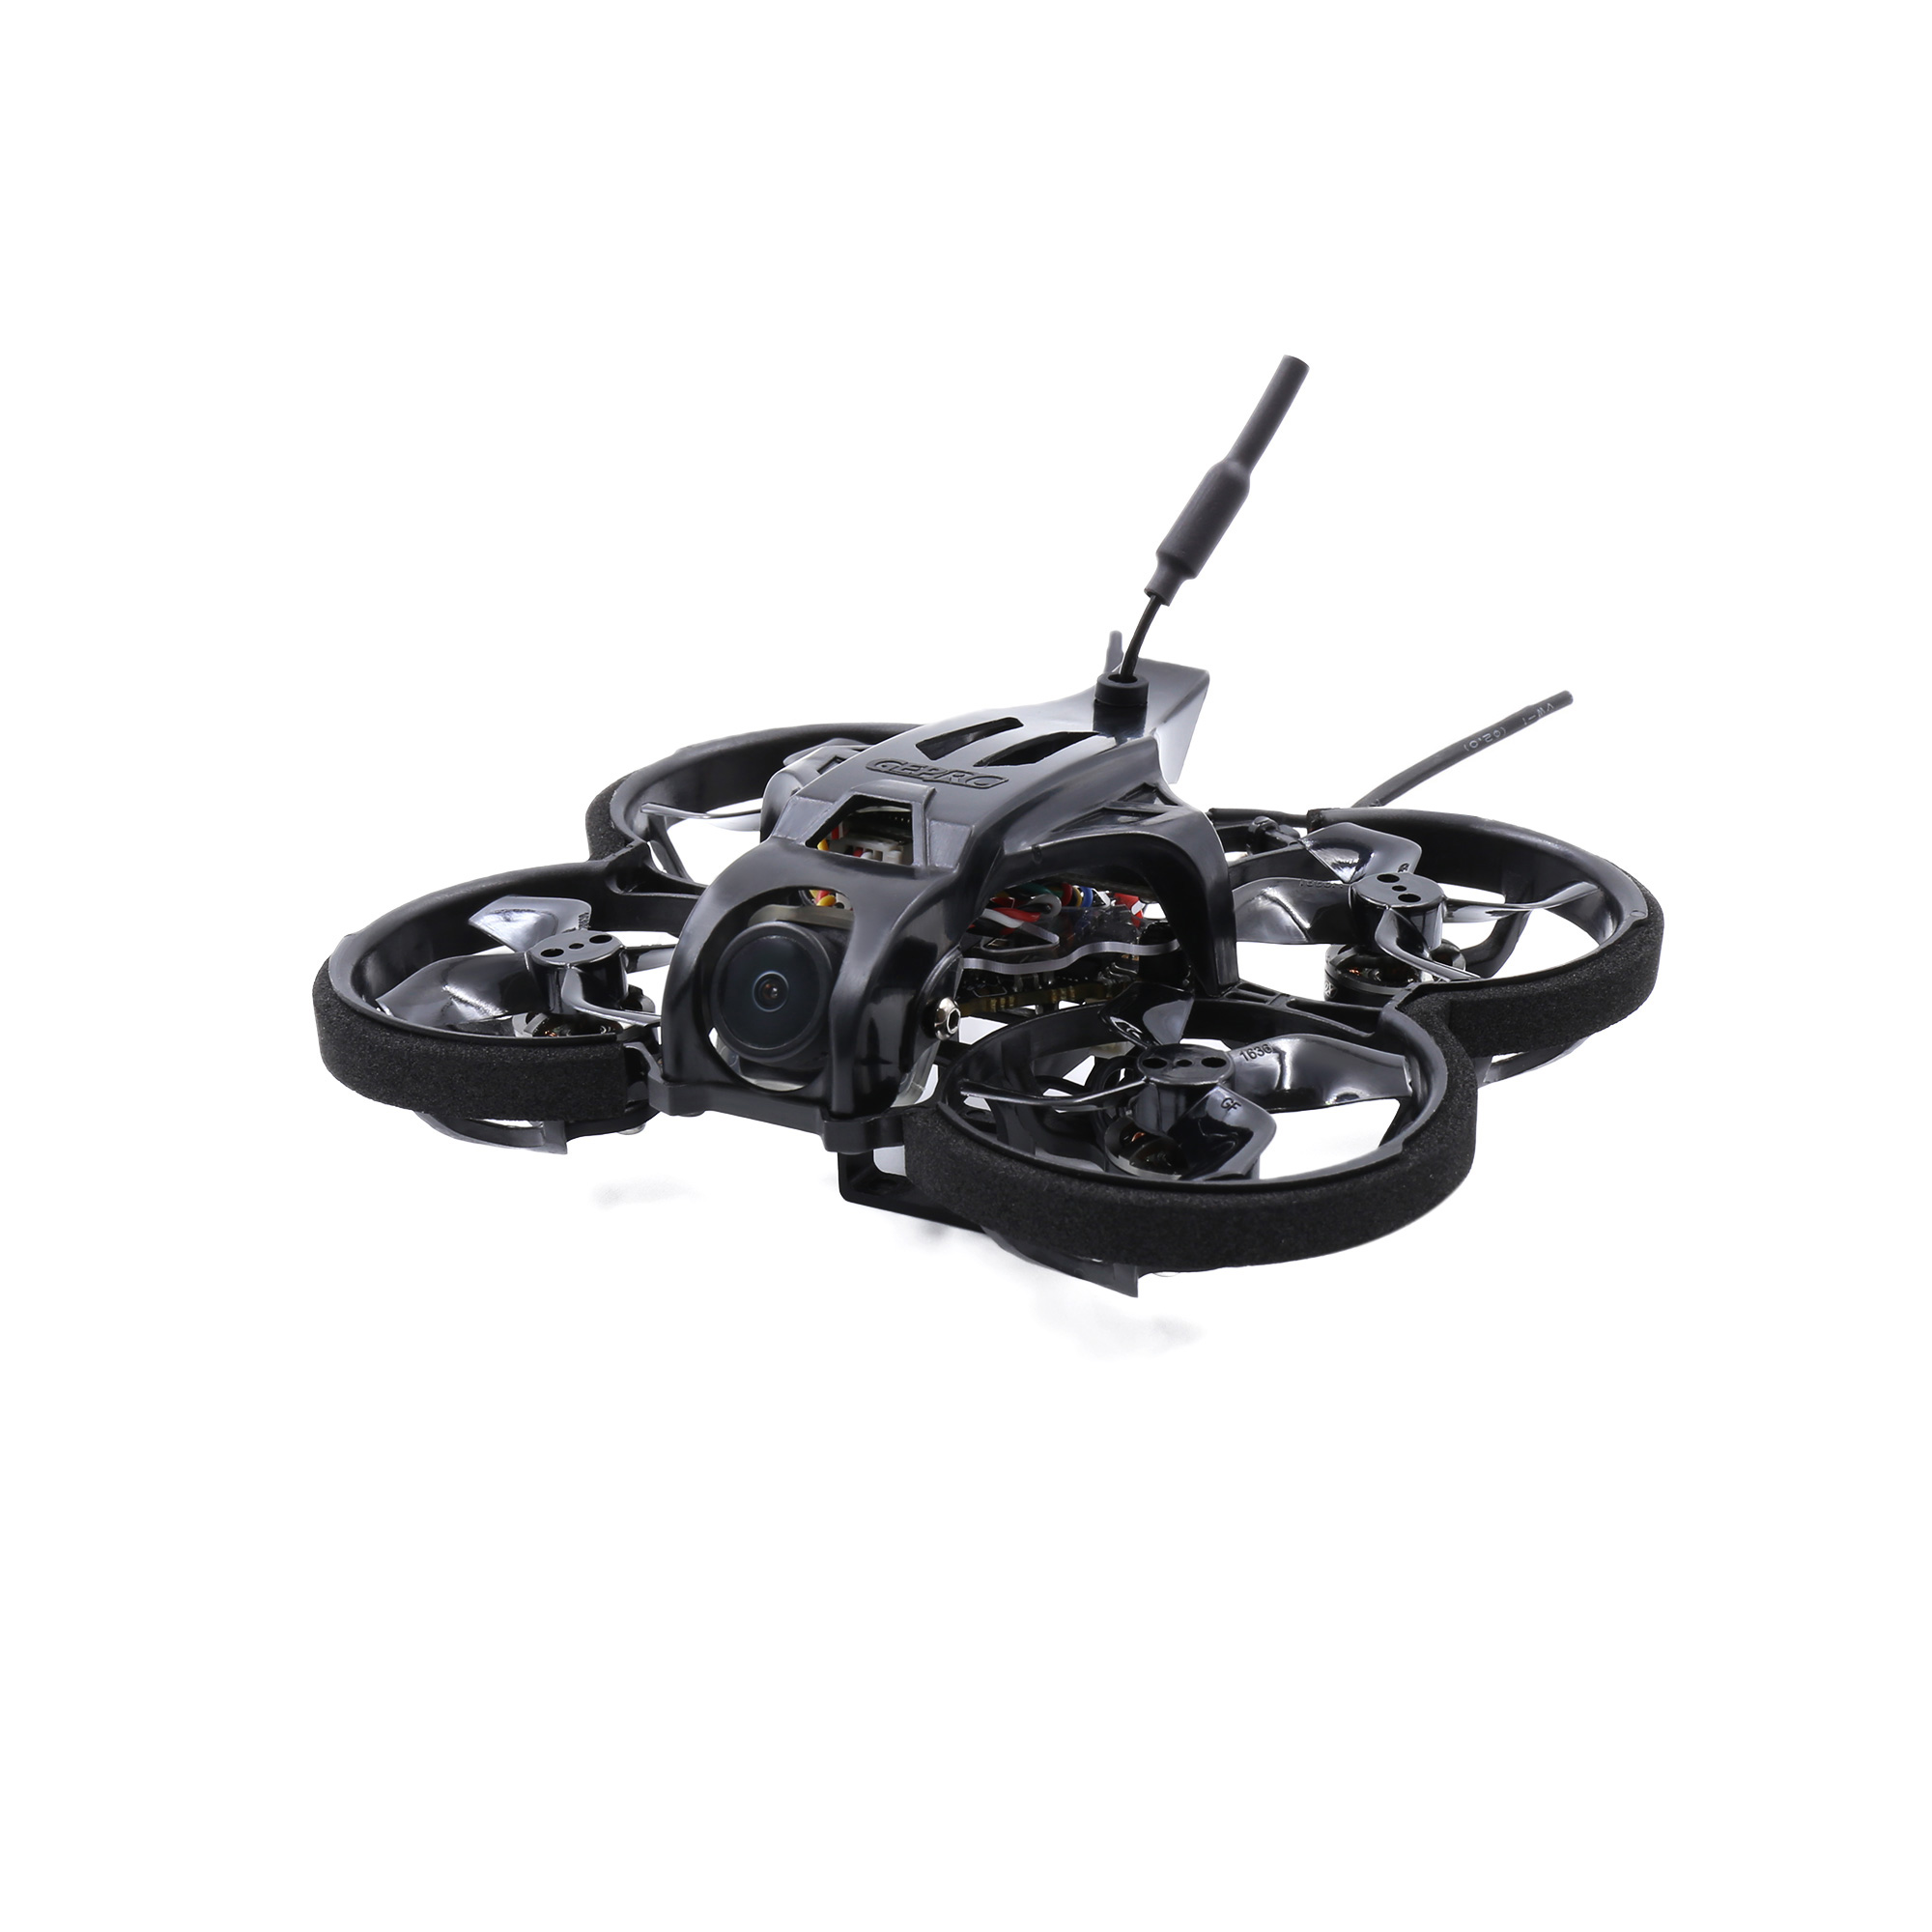 GEPRC-TinyGO-16inch-2S-FPV-Indoor-Whoop-Runcam-Nano2-GR8-Remote-ControllerRG1-Goggles-RTF-Ready-To-F-1788771-4